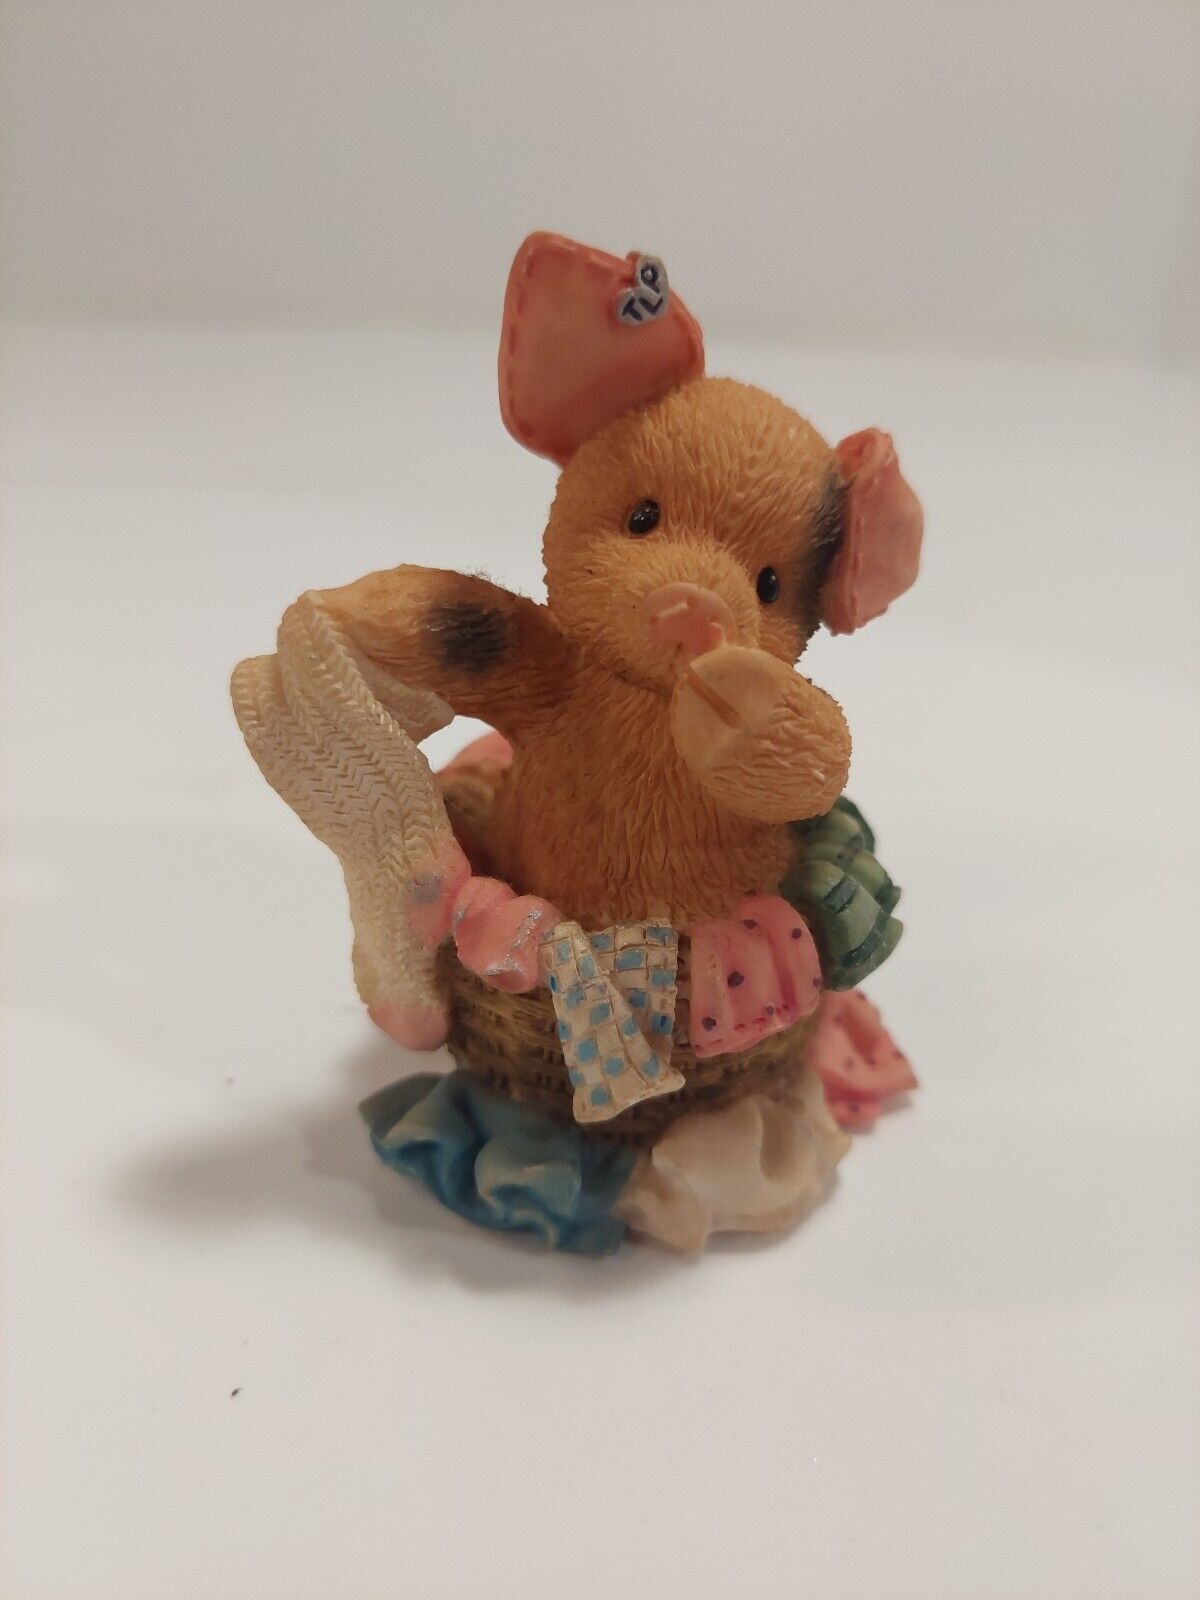 Enesco This Little Piggy “You swept me off my feet” 1997 Vintage Figurine